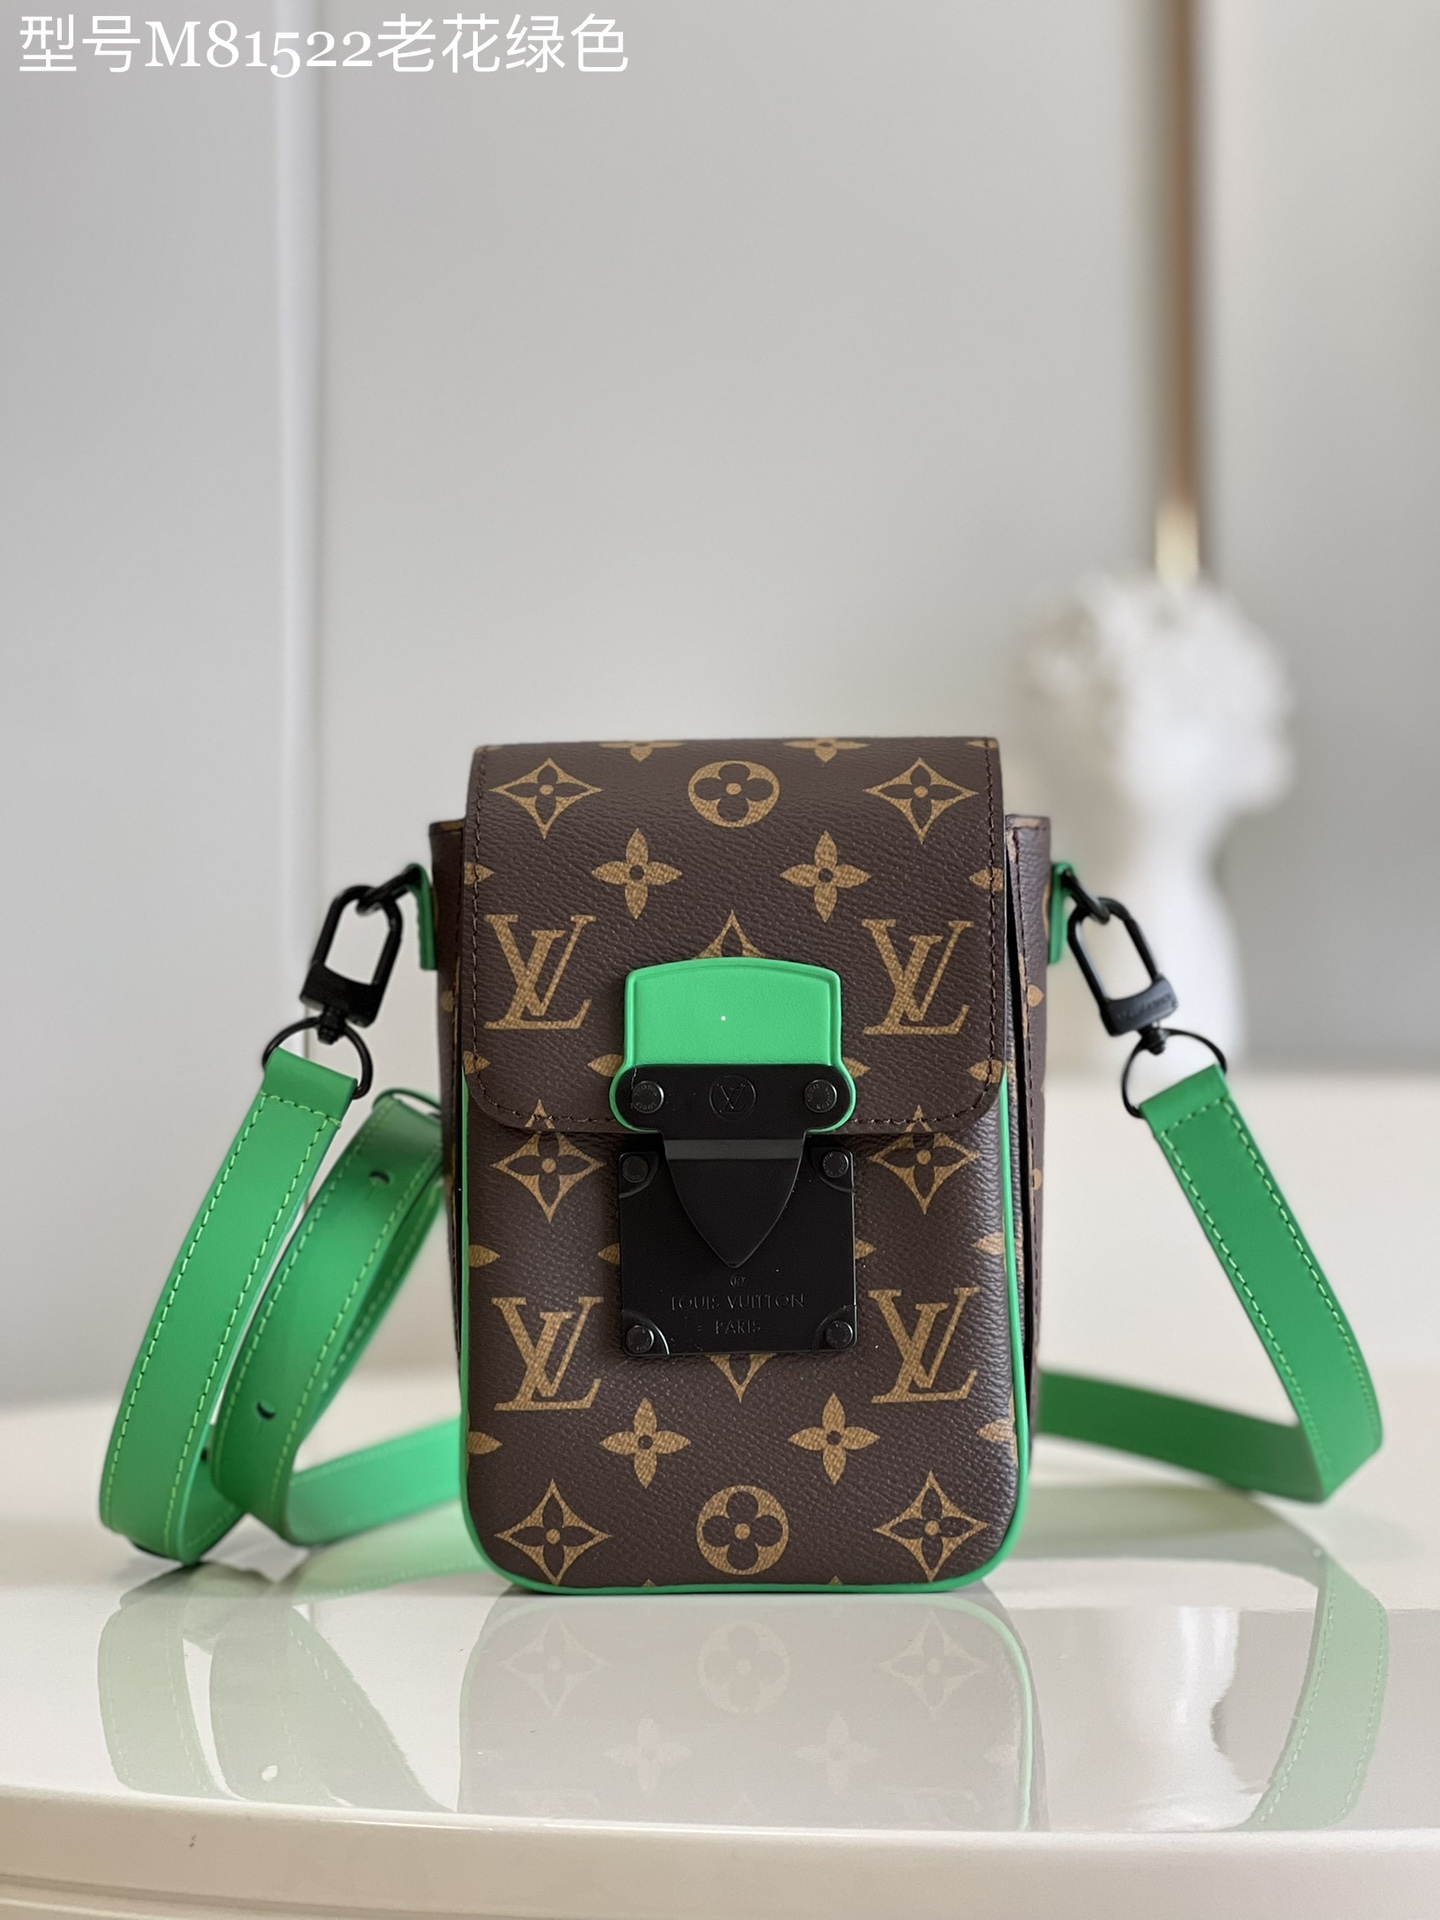 Louis Vuitton Wholesale
 Wallet Supplier in China
 Green Canvas M81522